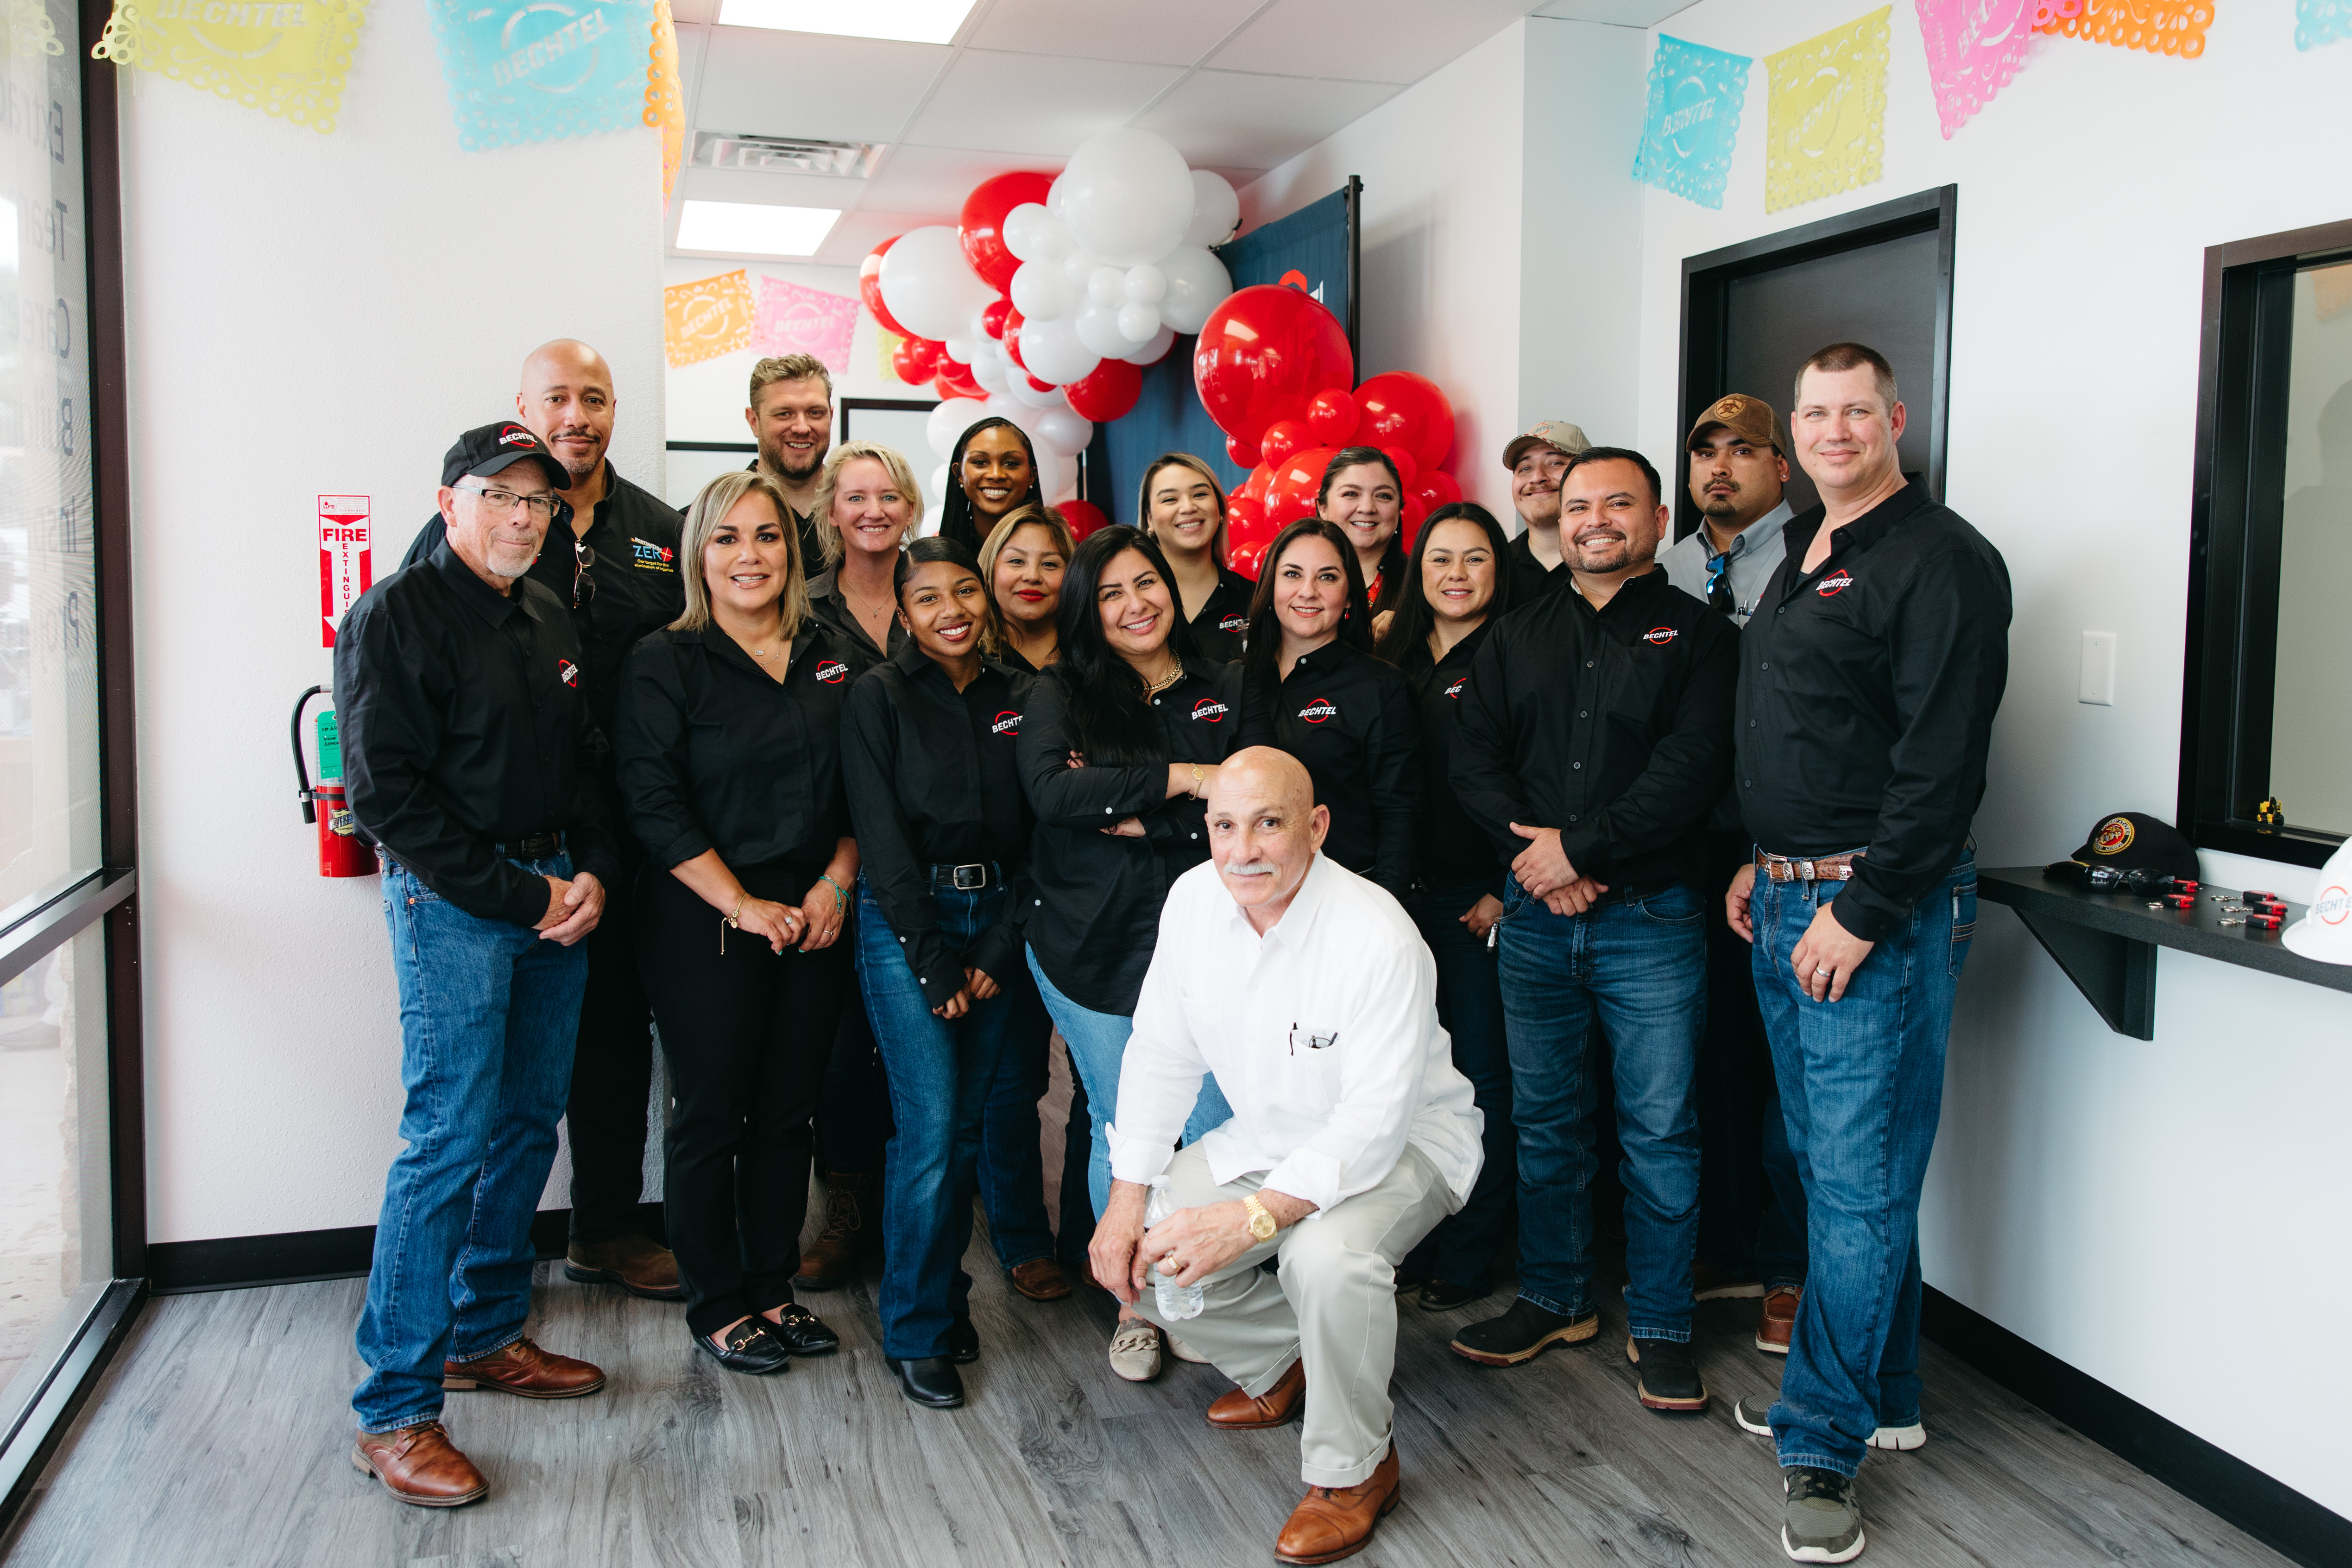 Group photo of the Bechtel team during the office opening for the new Craft Professional Recruitment Center in the Rio Grande Valley. 